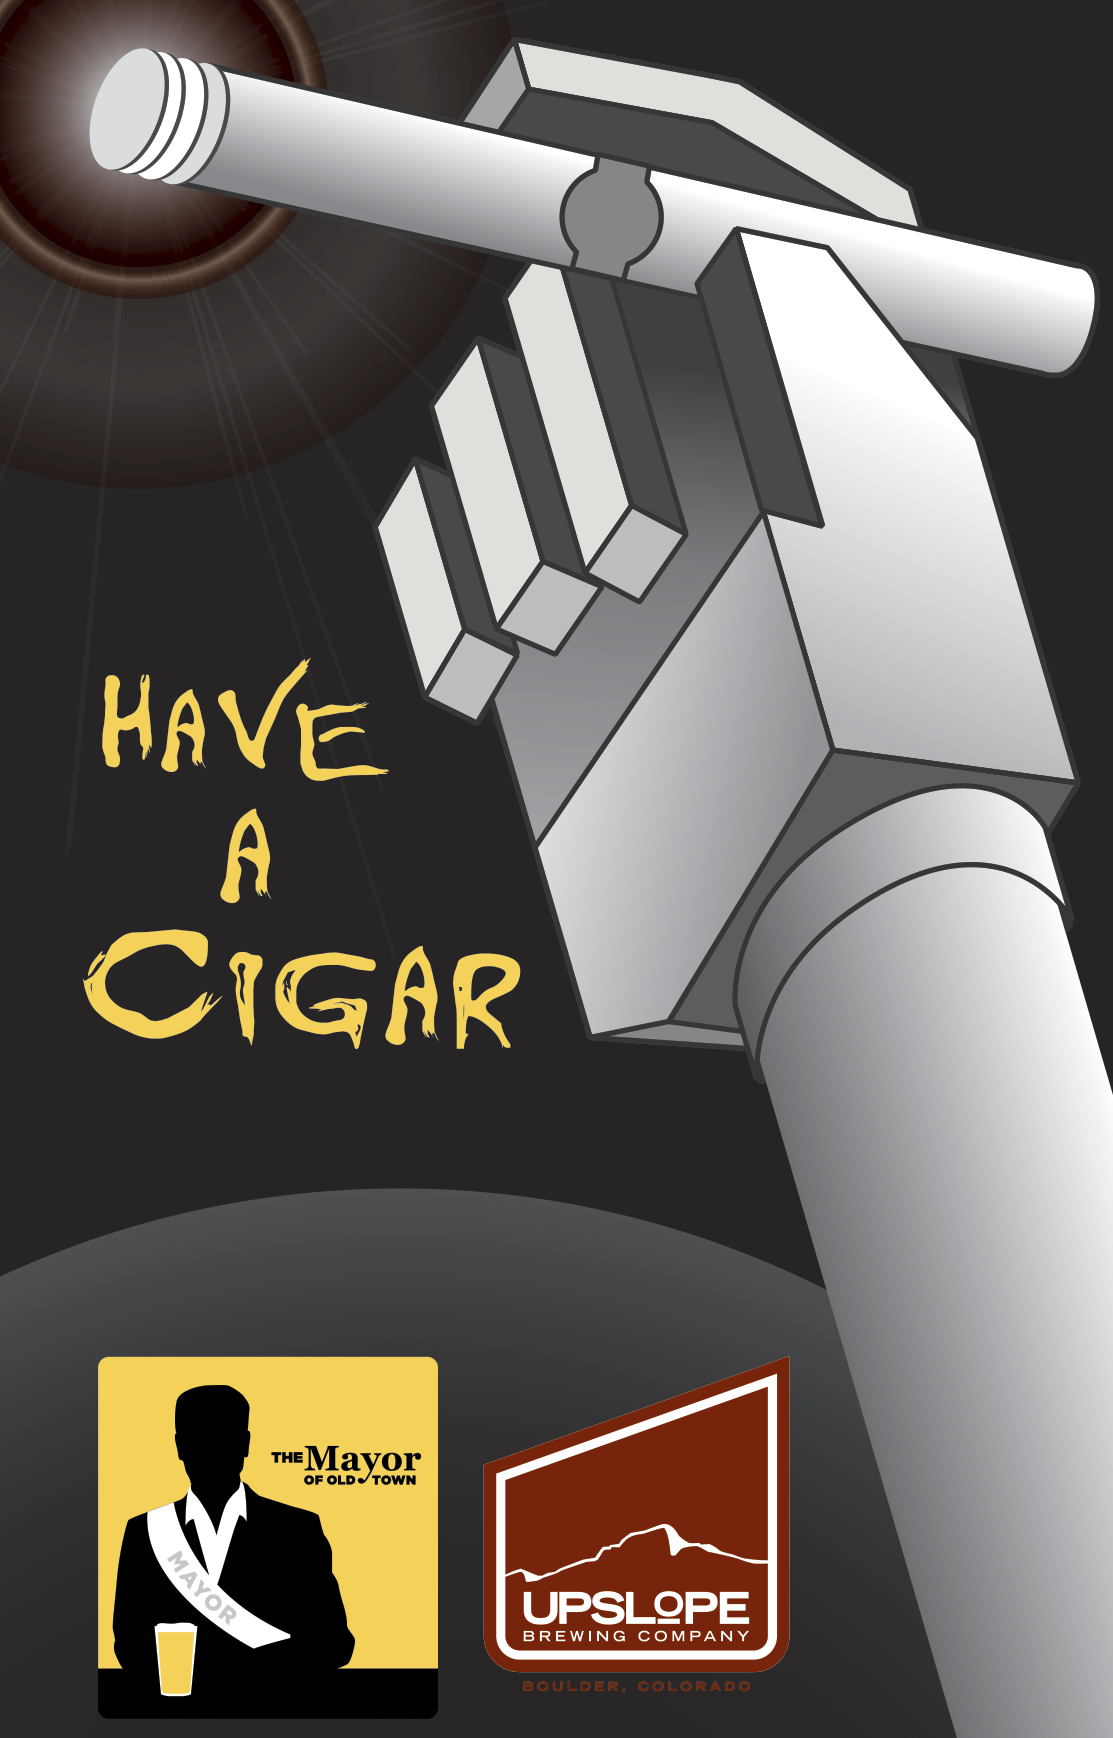 Have A Cigar